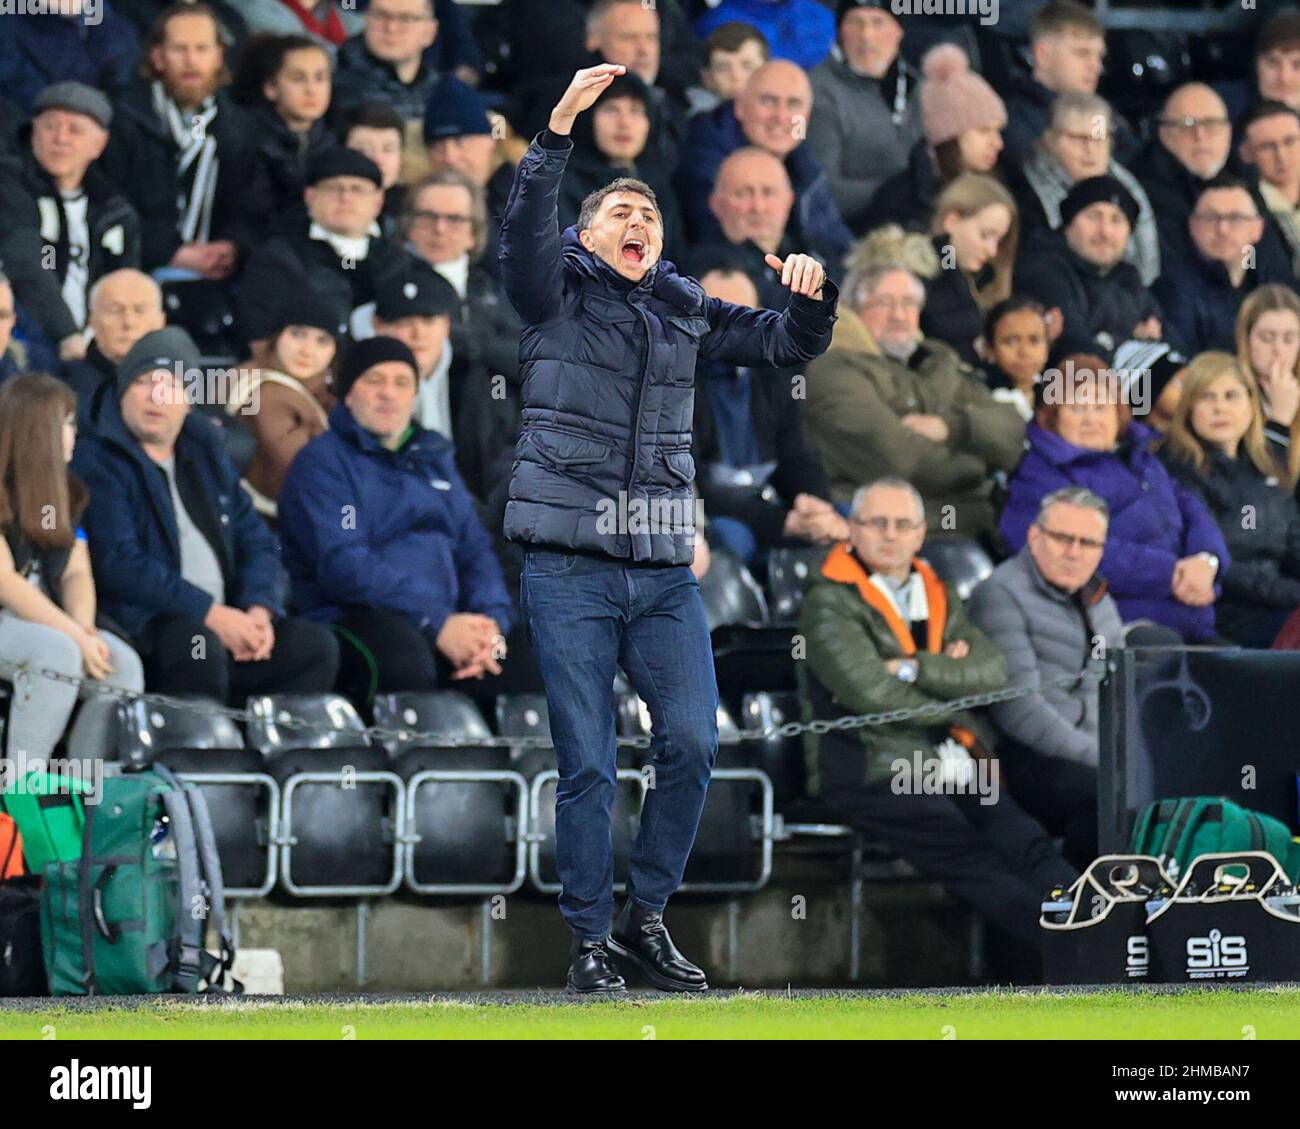 Shota Arveladze the Hull City manager on the sidelines during the game Stock Photo